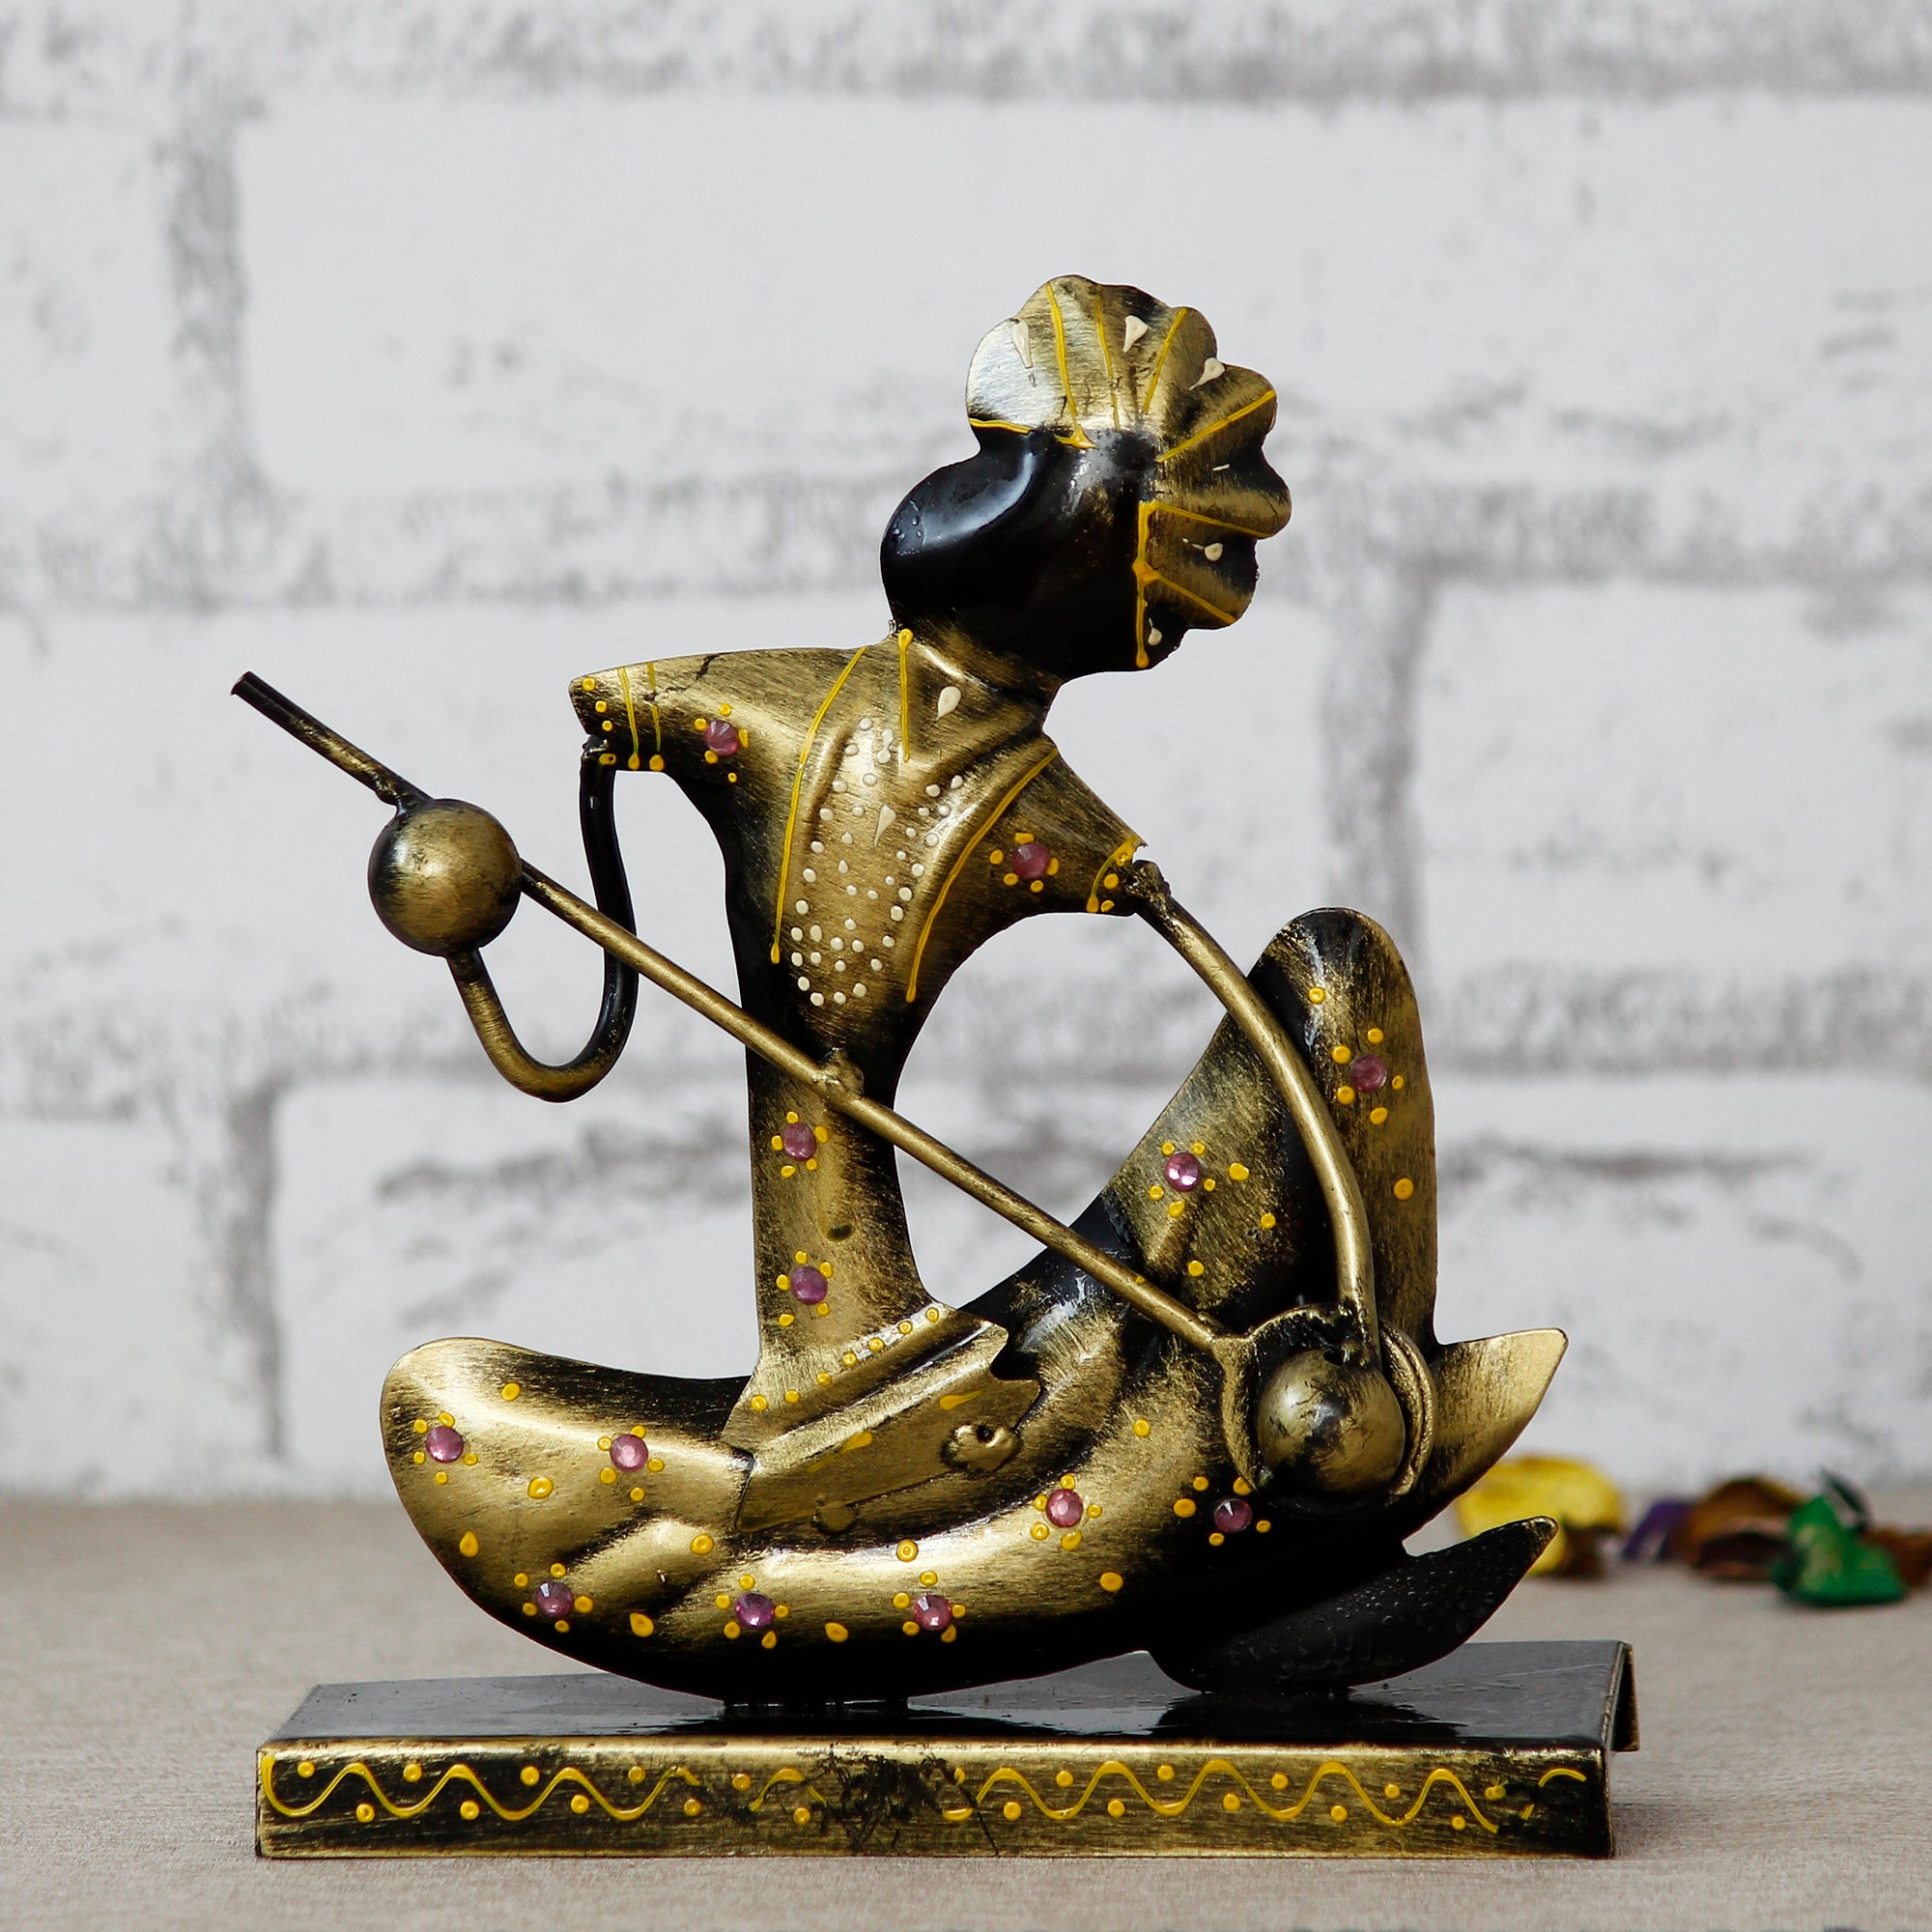 Iron Tribal Man Figurine with Paghdi Playing Banjo Musical Instrument Decorative Showpiece (Golden and Black) 1